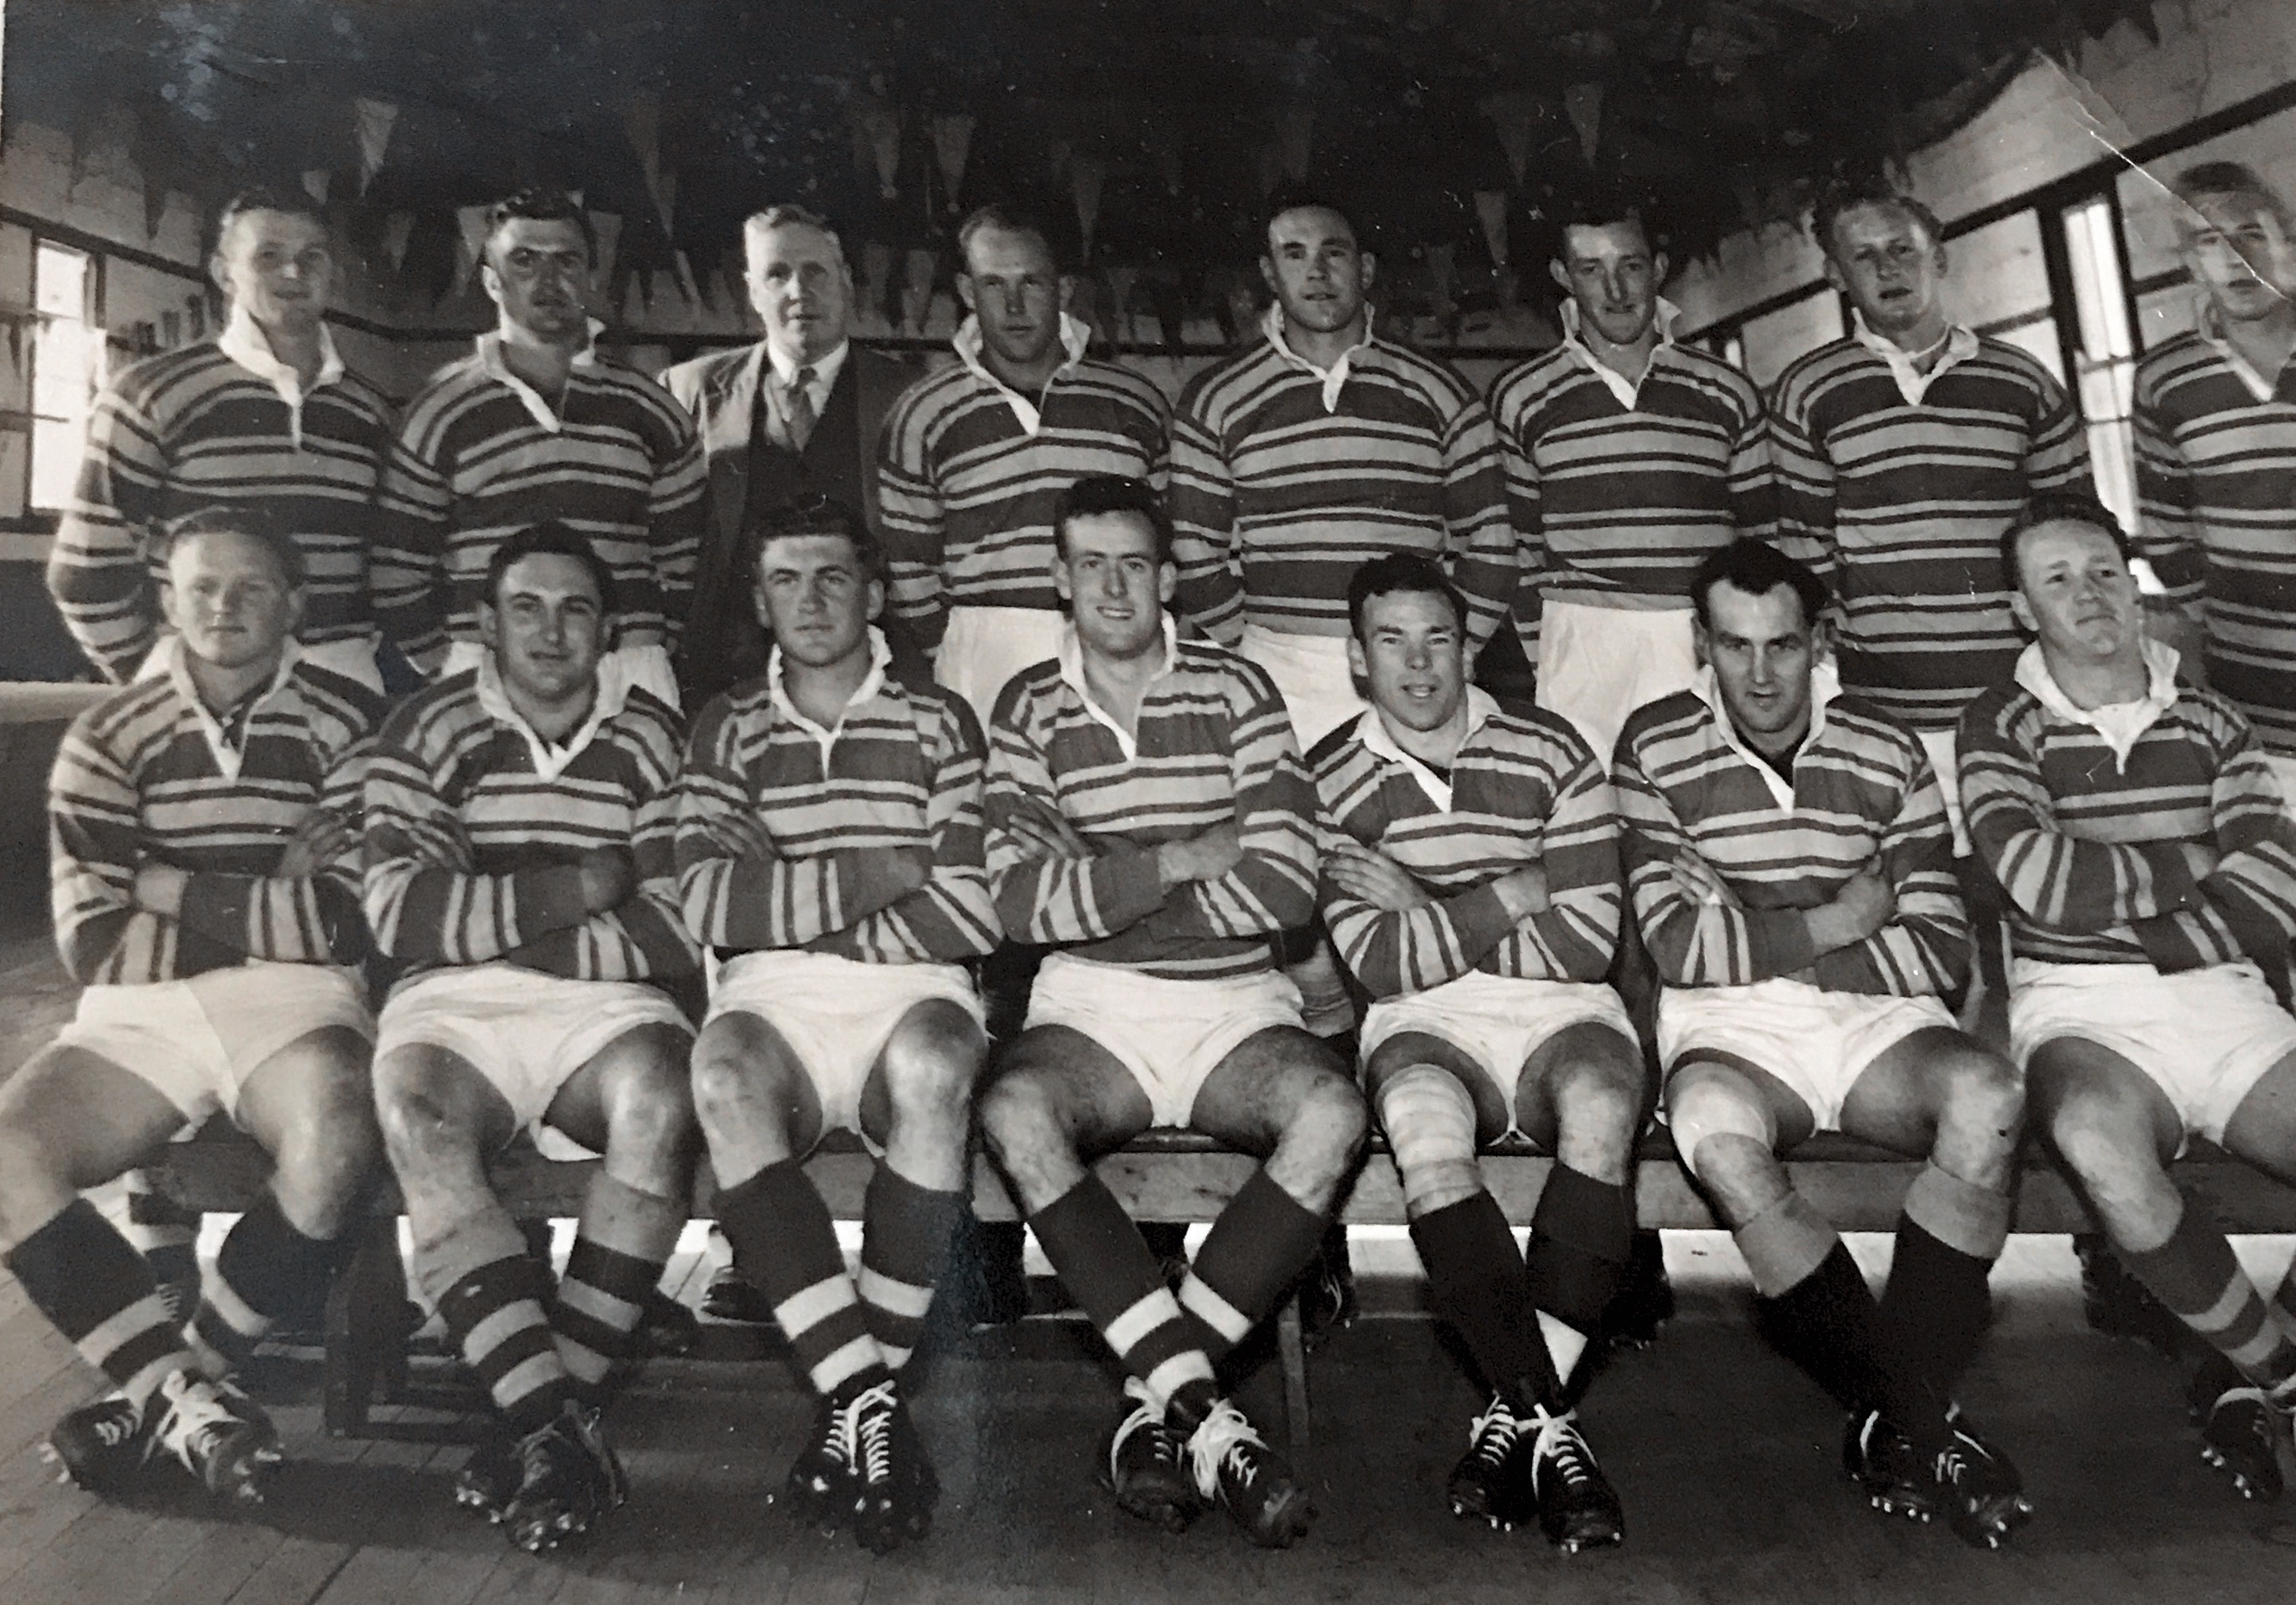 Keith Harris. South Sydney reserve grade rugby league. 1950’s
Back row first on the left 